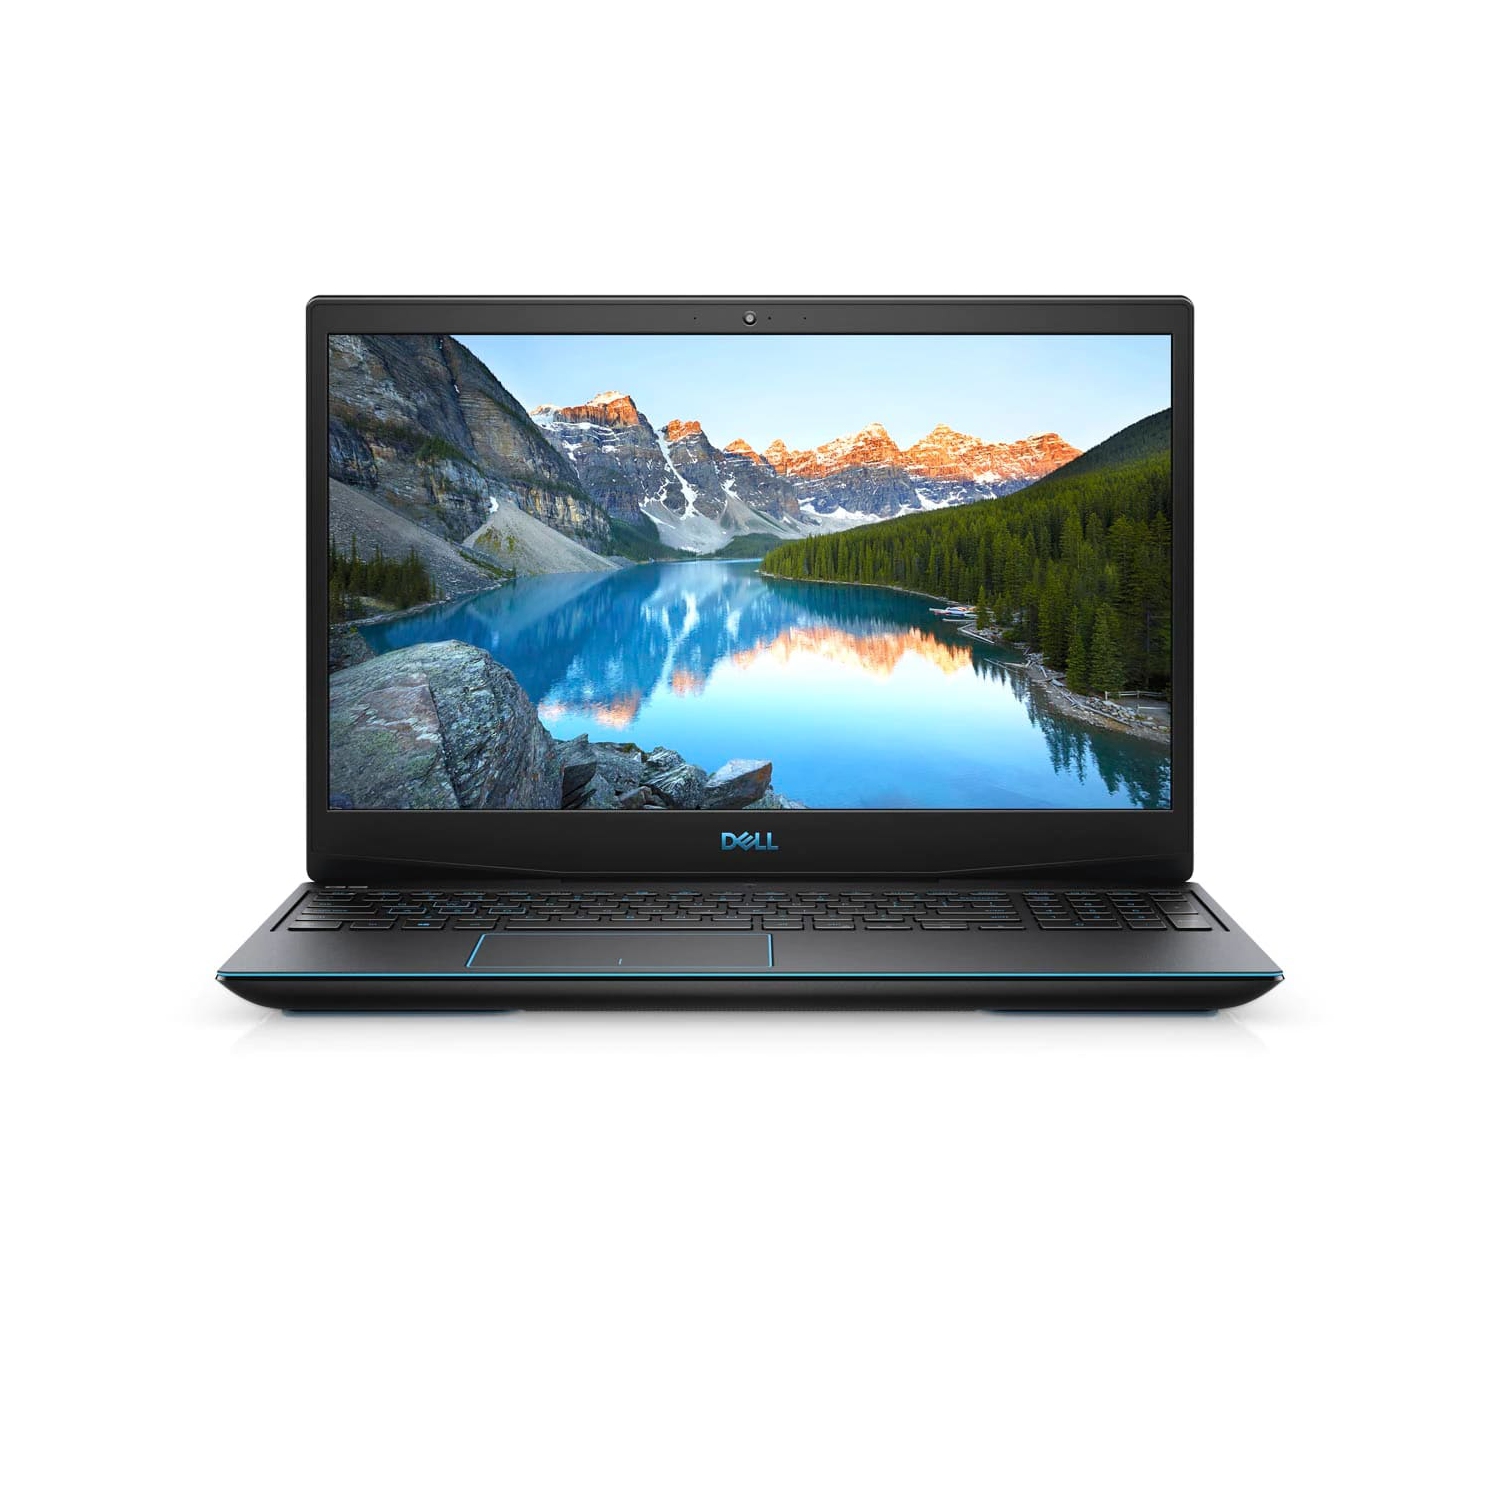 Refurbished (Excellent) - Dell G3 15 3590 Gaming Laptop (2019) | 15.6" FHD | Core i7 - 1TB HDD + 128GB SSD - 8GB RAM - 1660 Ti | 6 Cores @ 4.5 GHz Certified Refurbished